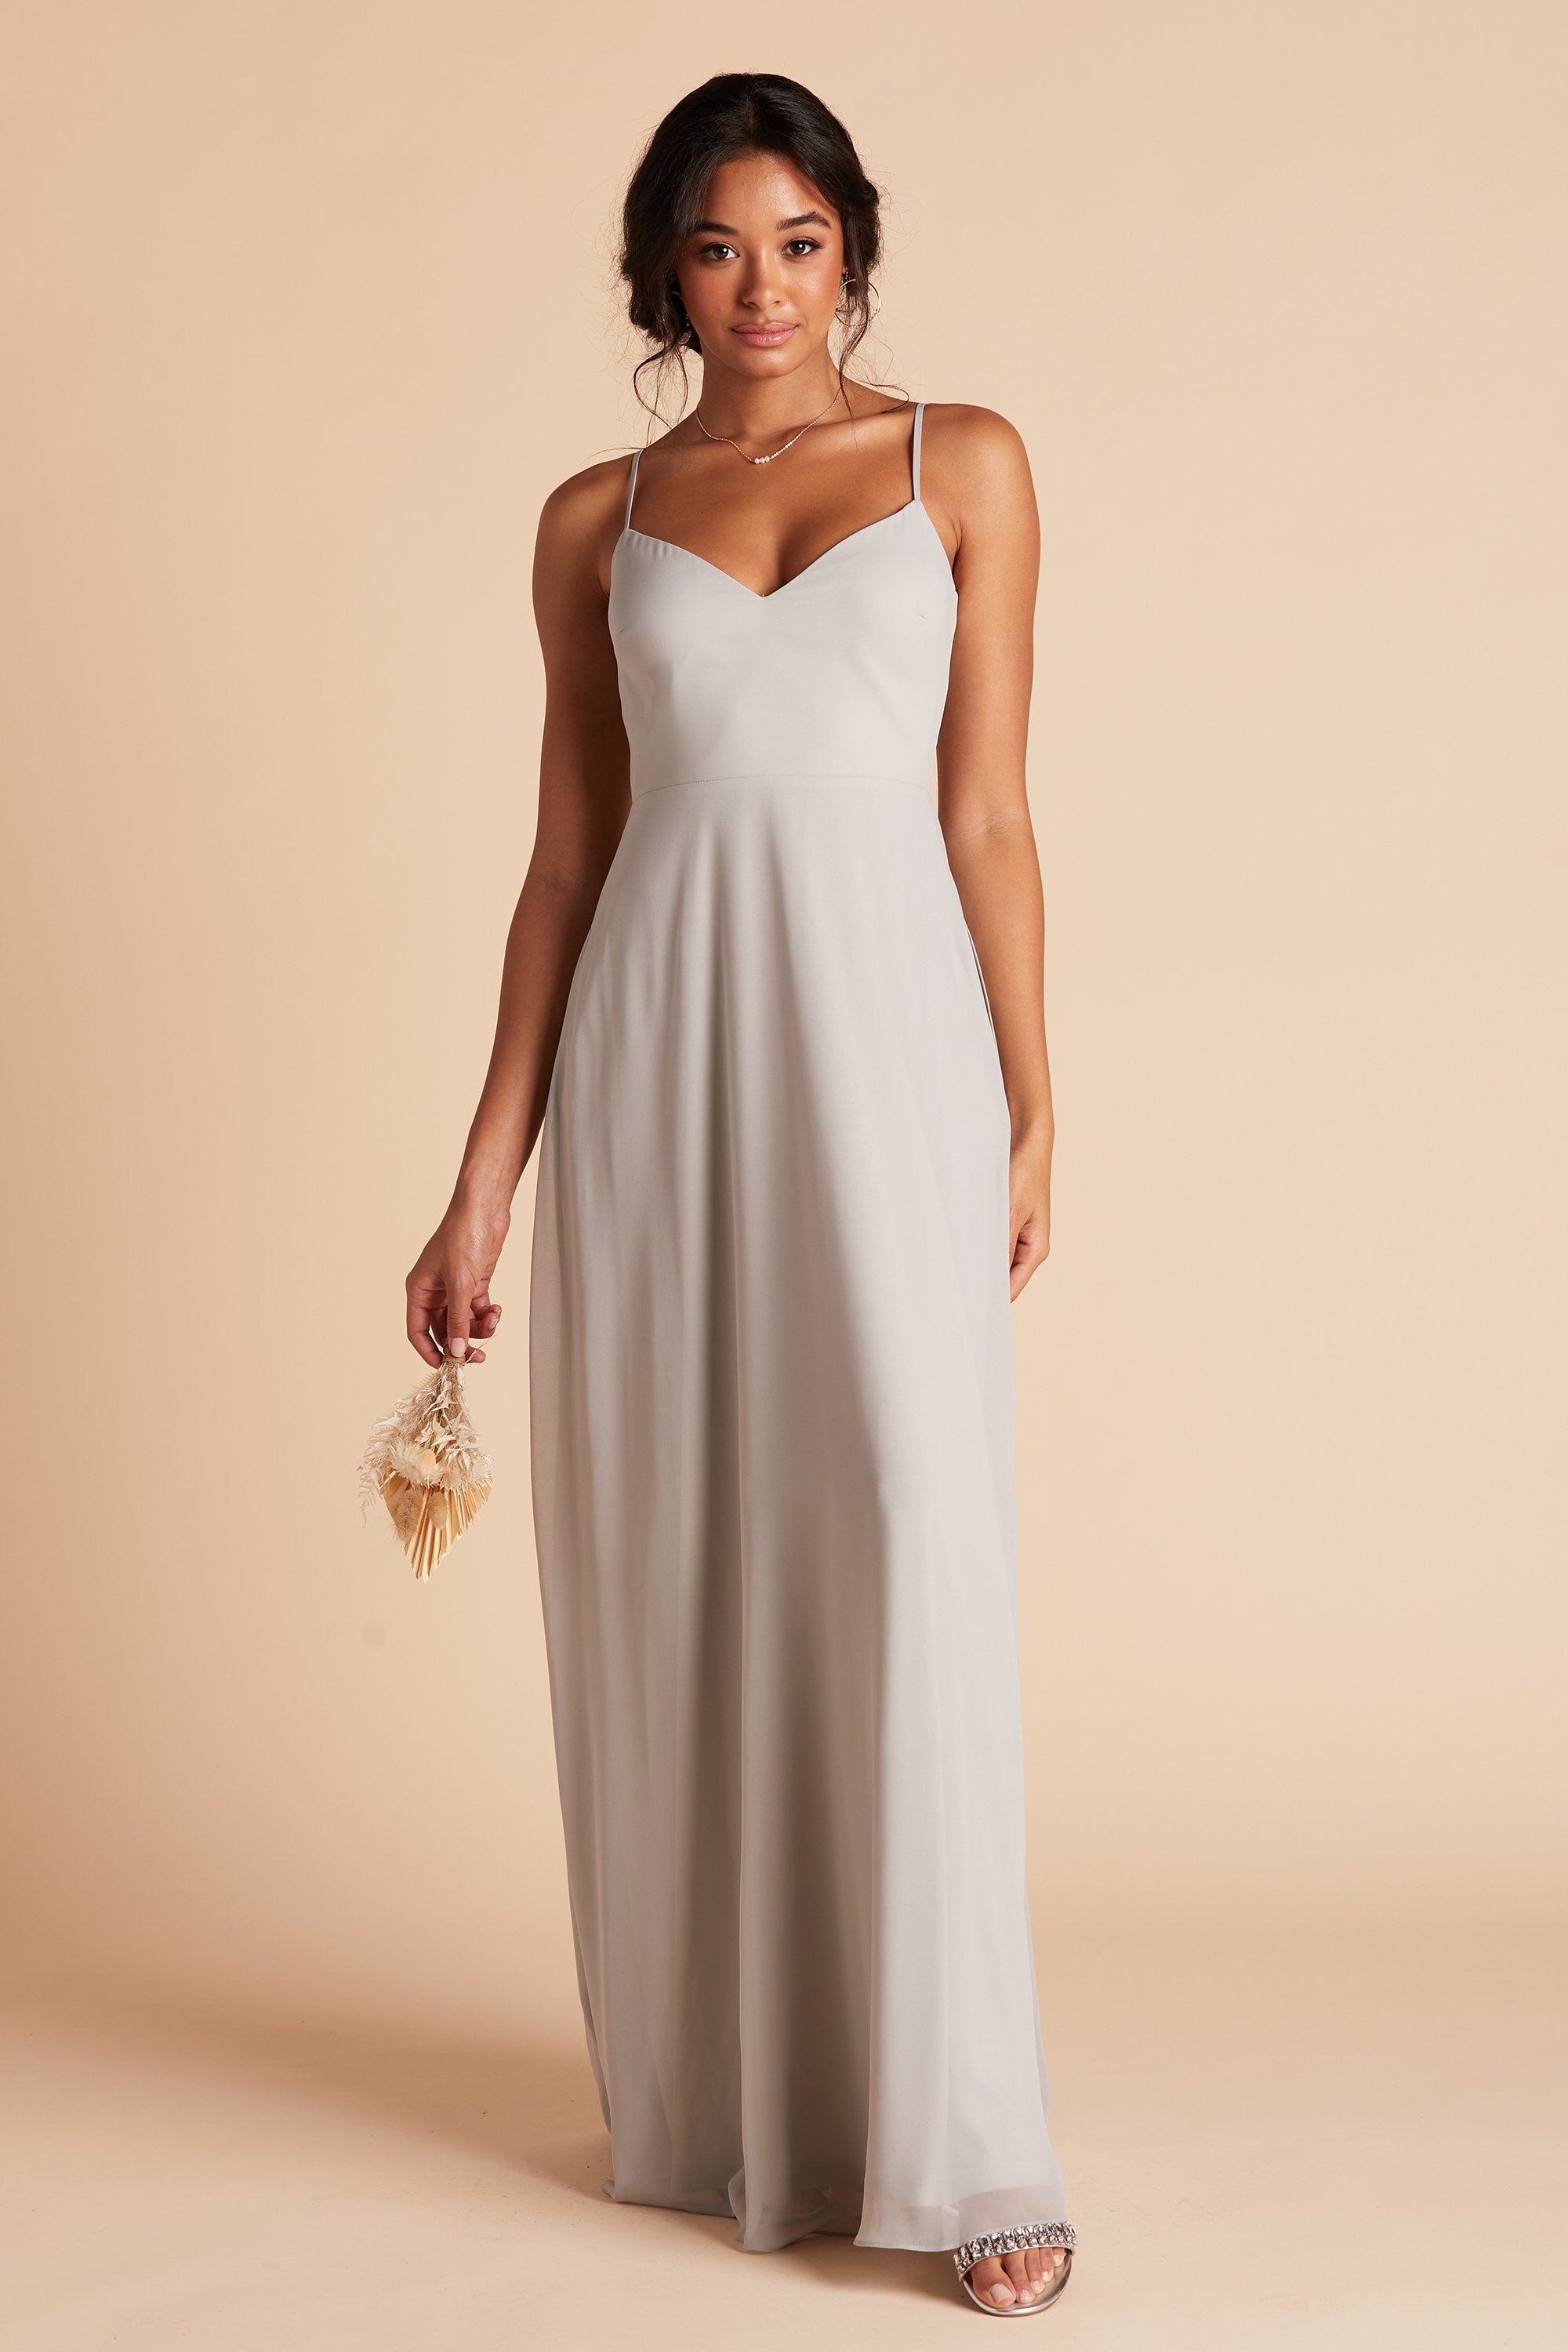 Devin convertible bridesmaid dress with slit in dove gray chiffon by Birdy Grey, front view